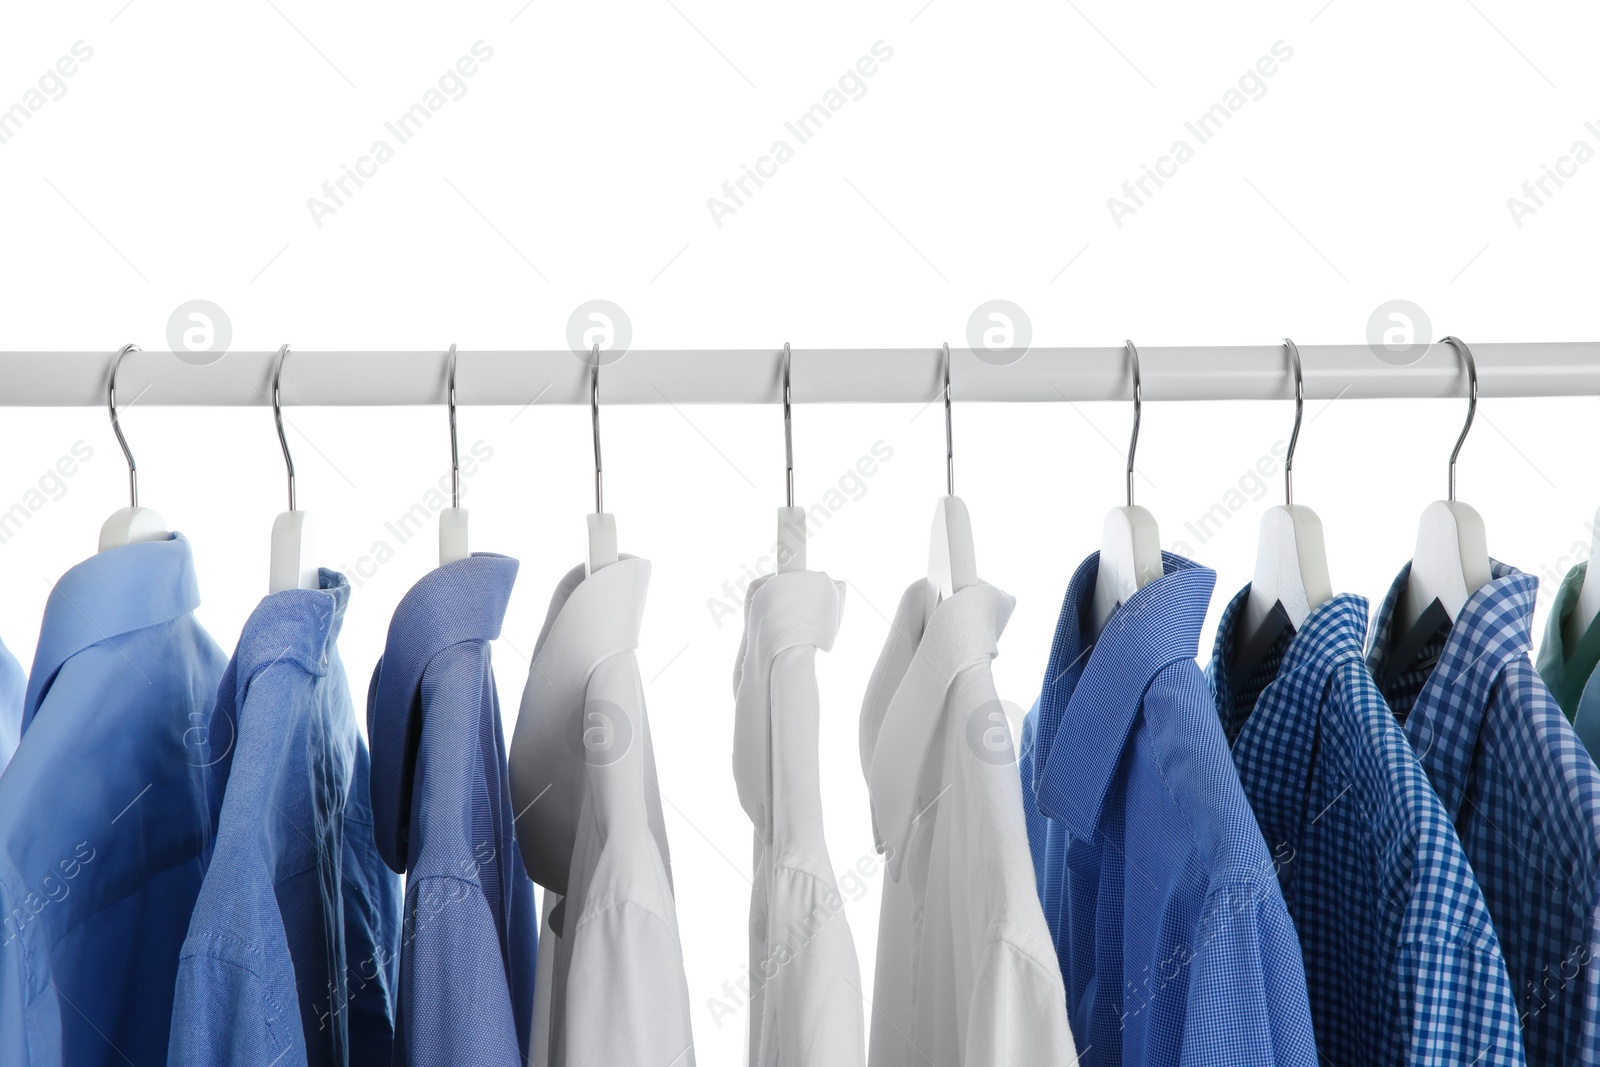 Photo of Men clothes hanging on wardrobe rack against white background, closeup